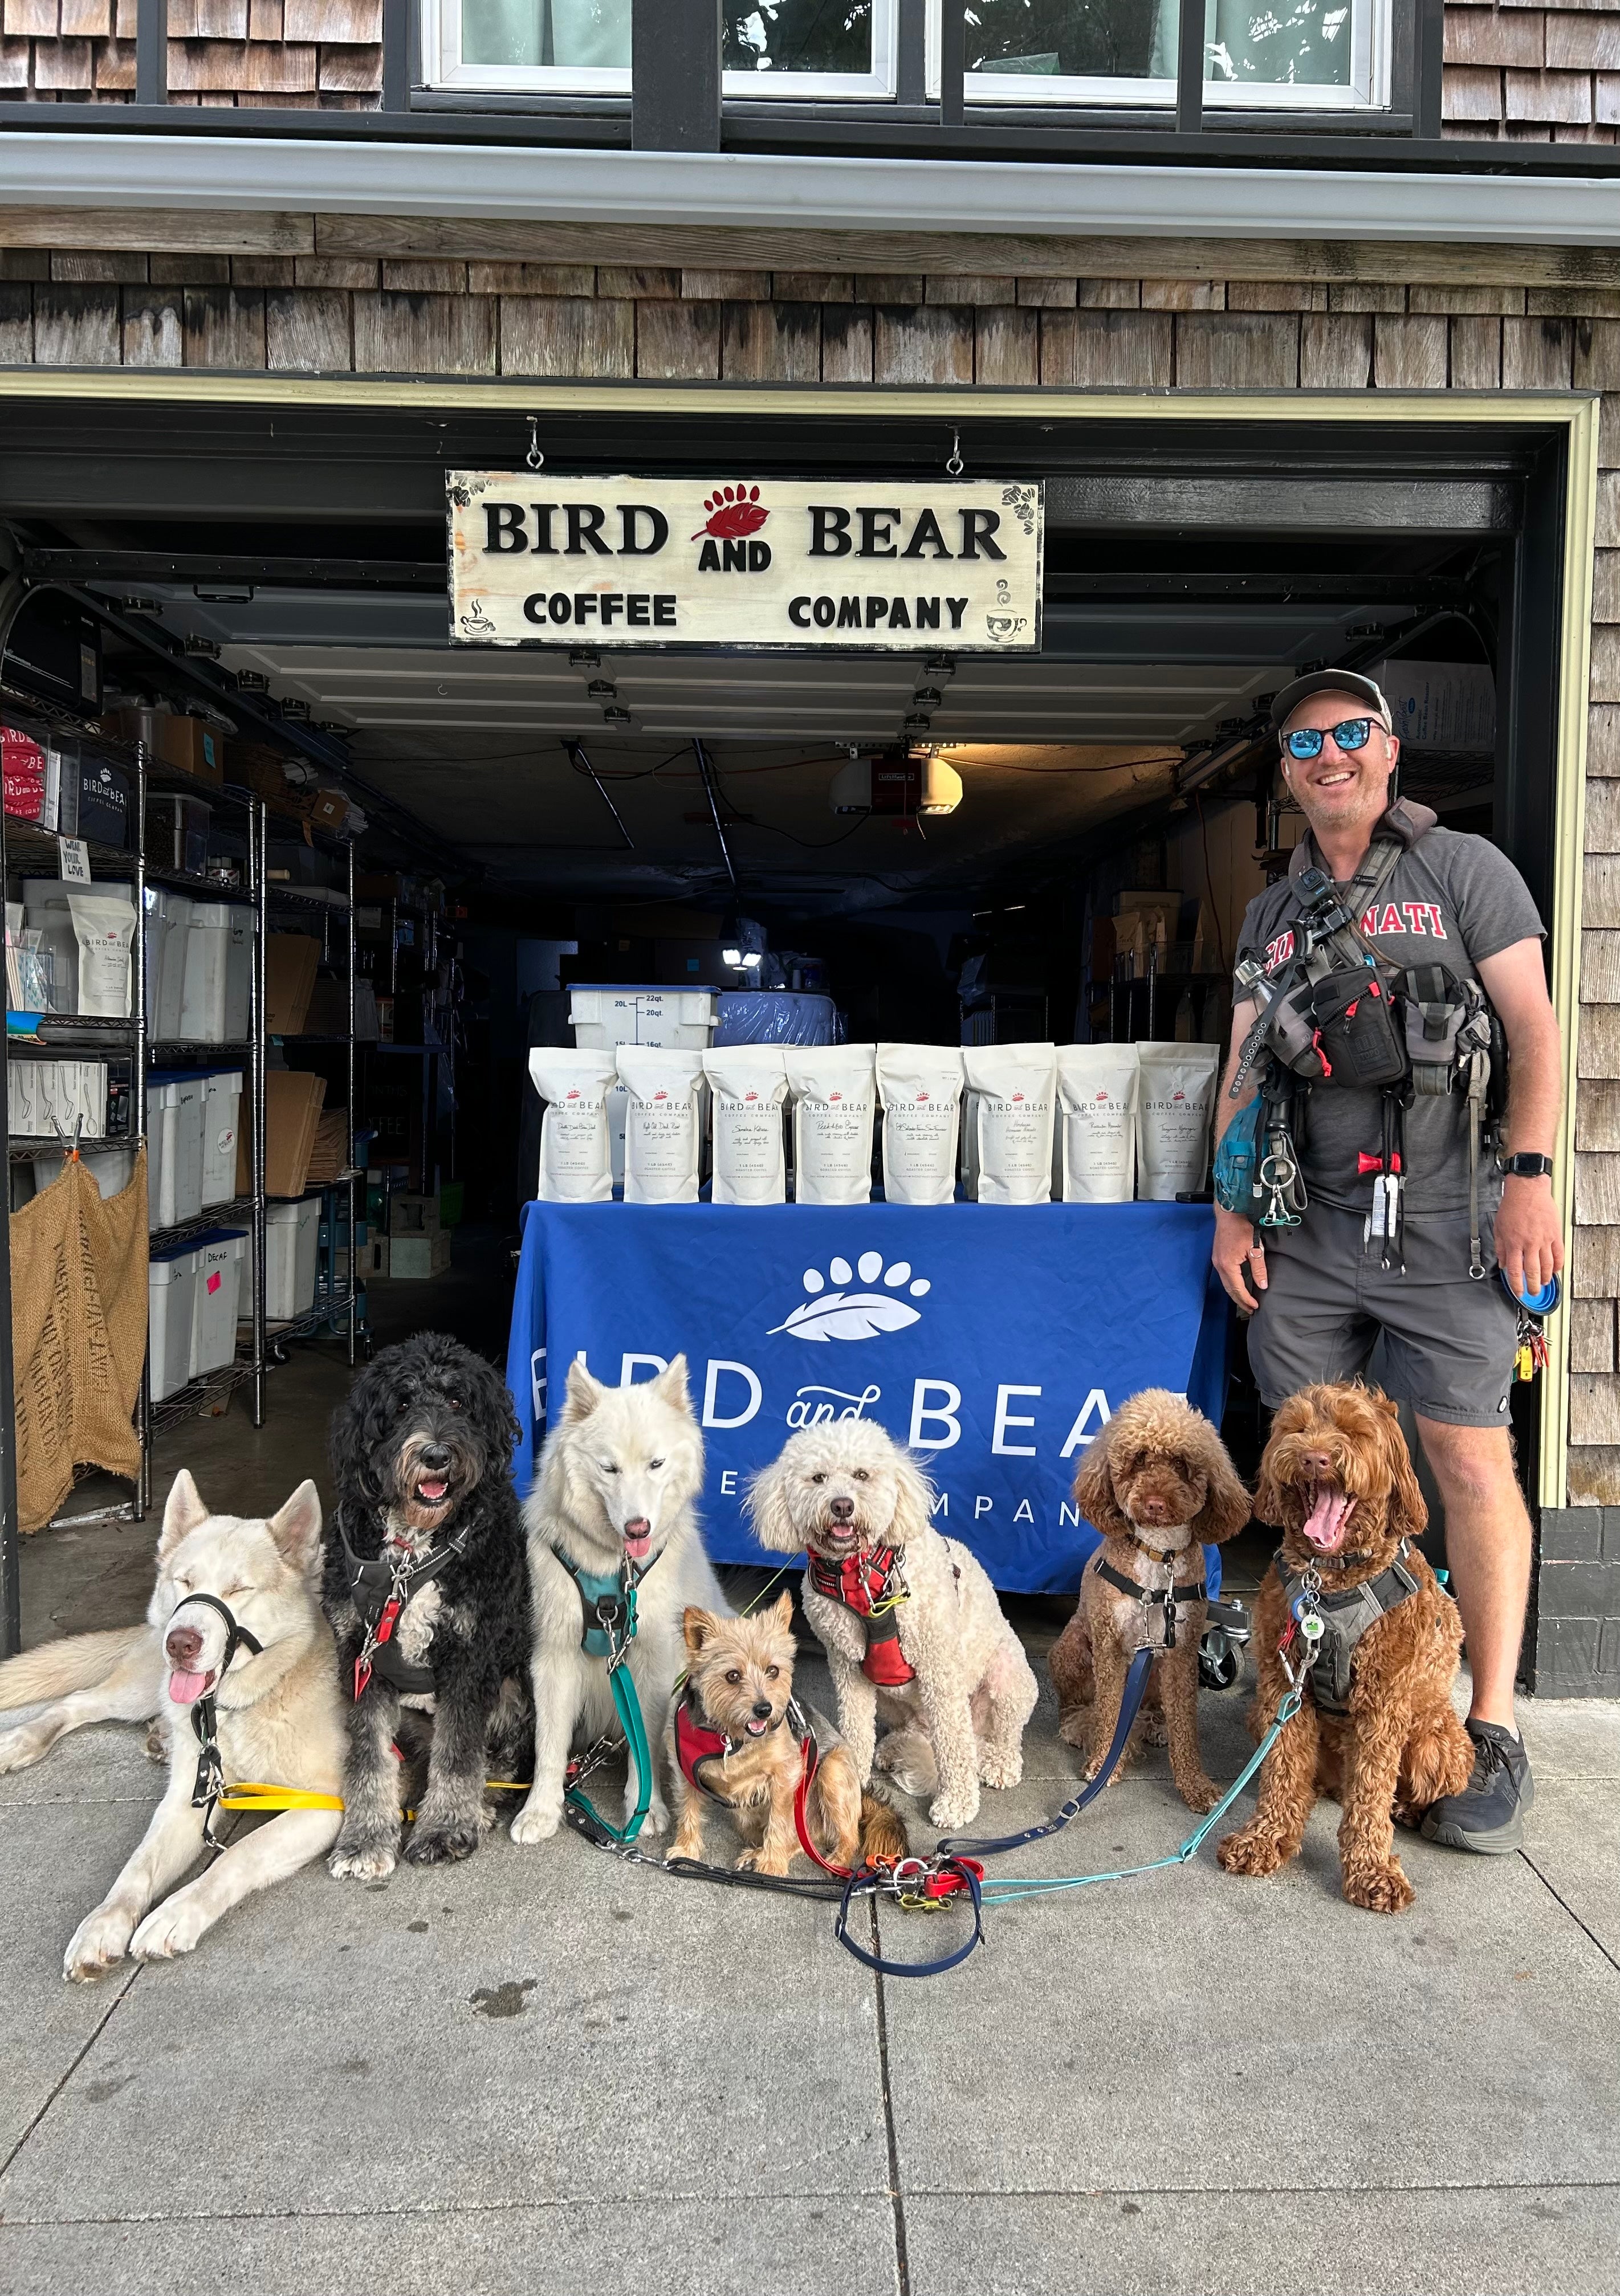 A male Caucasian dog walker is standing to the right of a group of dogs that are leashed together with TinyHorse equipment. They are in front of the large opening of a business with a sign that says “Bird and Bear Coffee Company.” The dog walker is smiling and many of the dogs have their tongues hanging out.